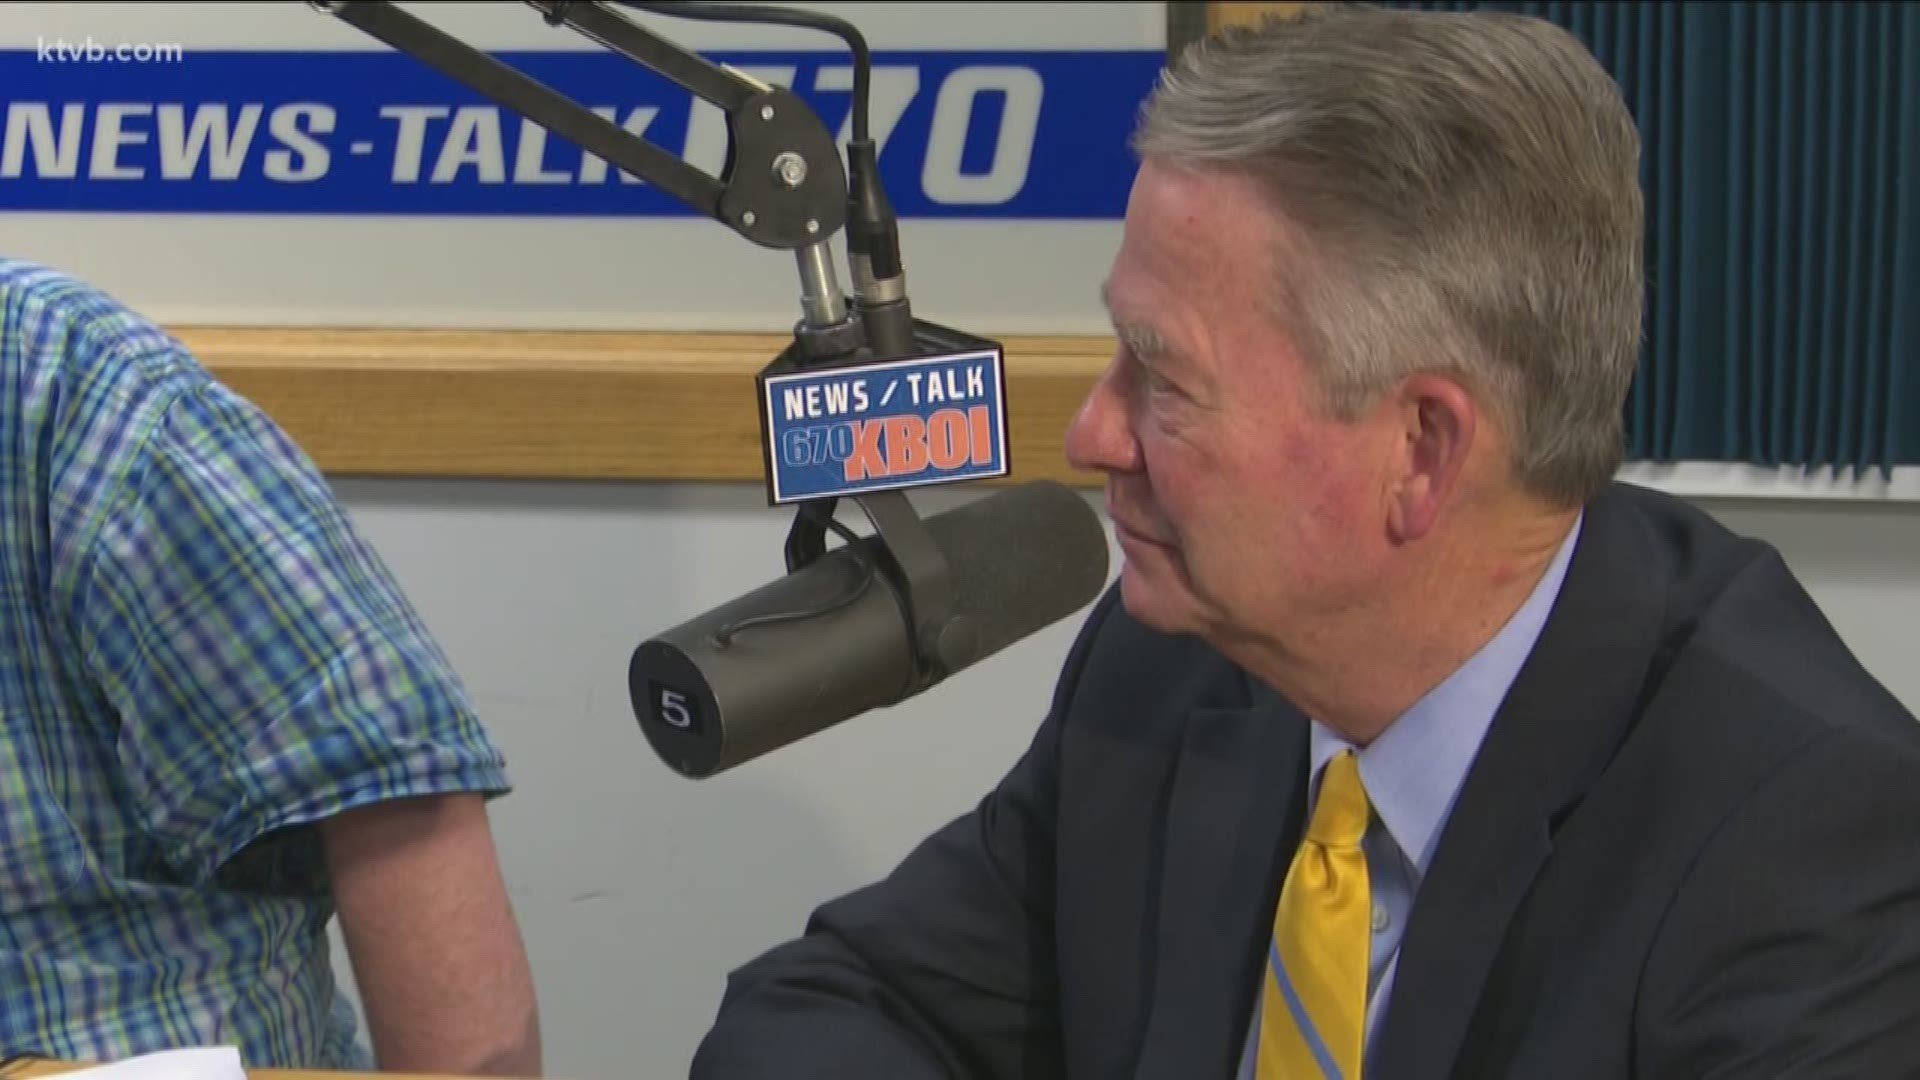 As we get closer to Election Day, Idaho voters are listening closely to the top candidates. On Monday, September 24, 2018, Lt. Gov. Brad Little, the Republican candidate for governor, talked about the issues during an hour-long interview on 670 KBOI. 